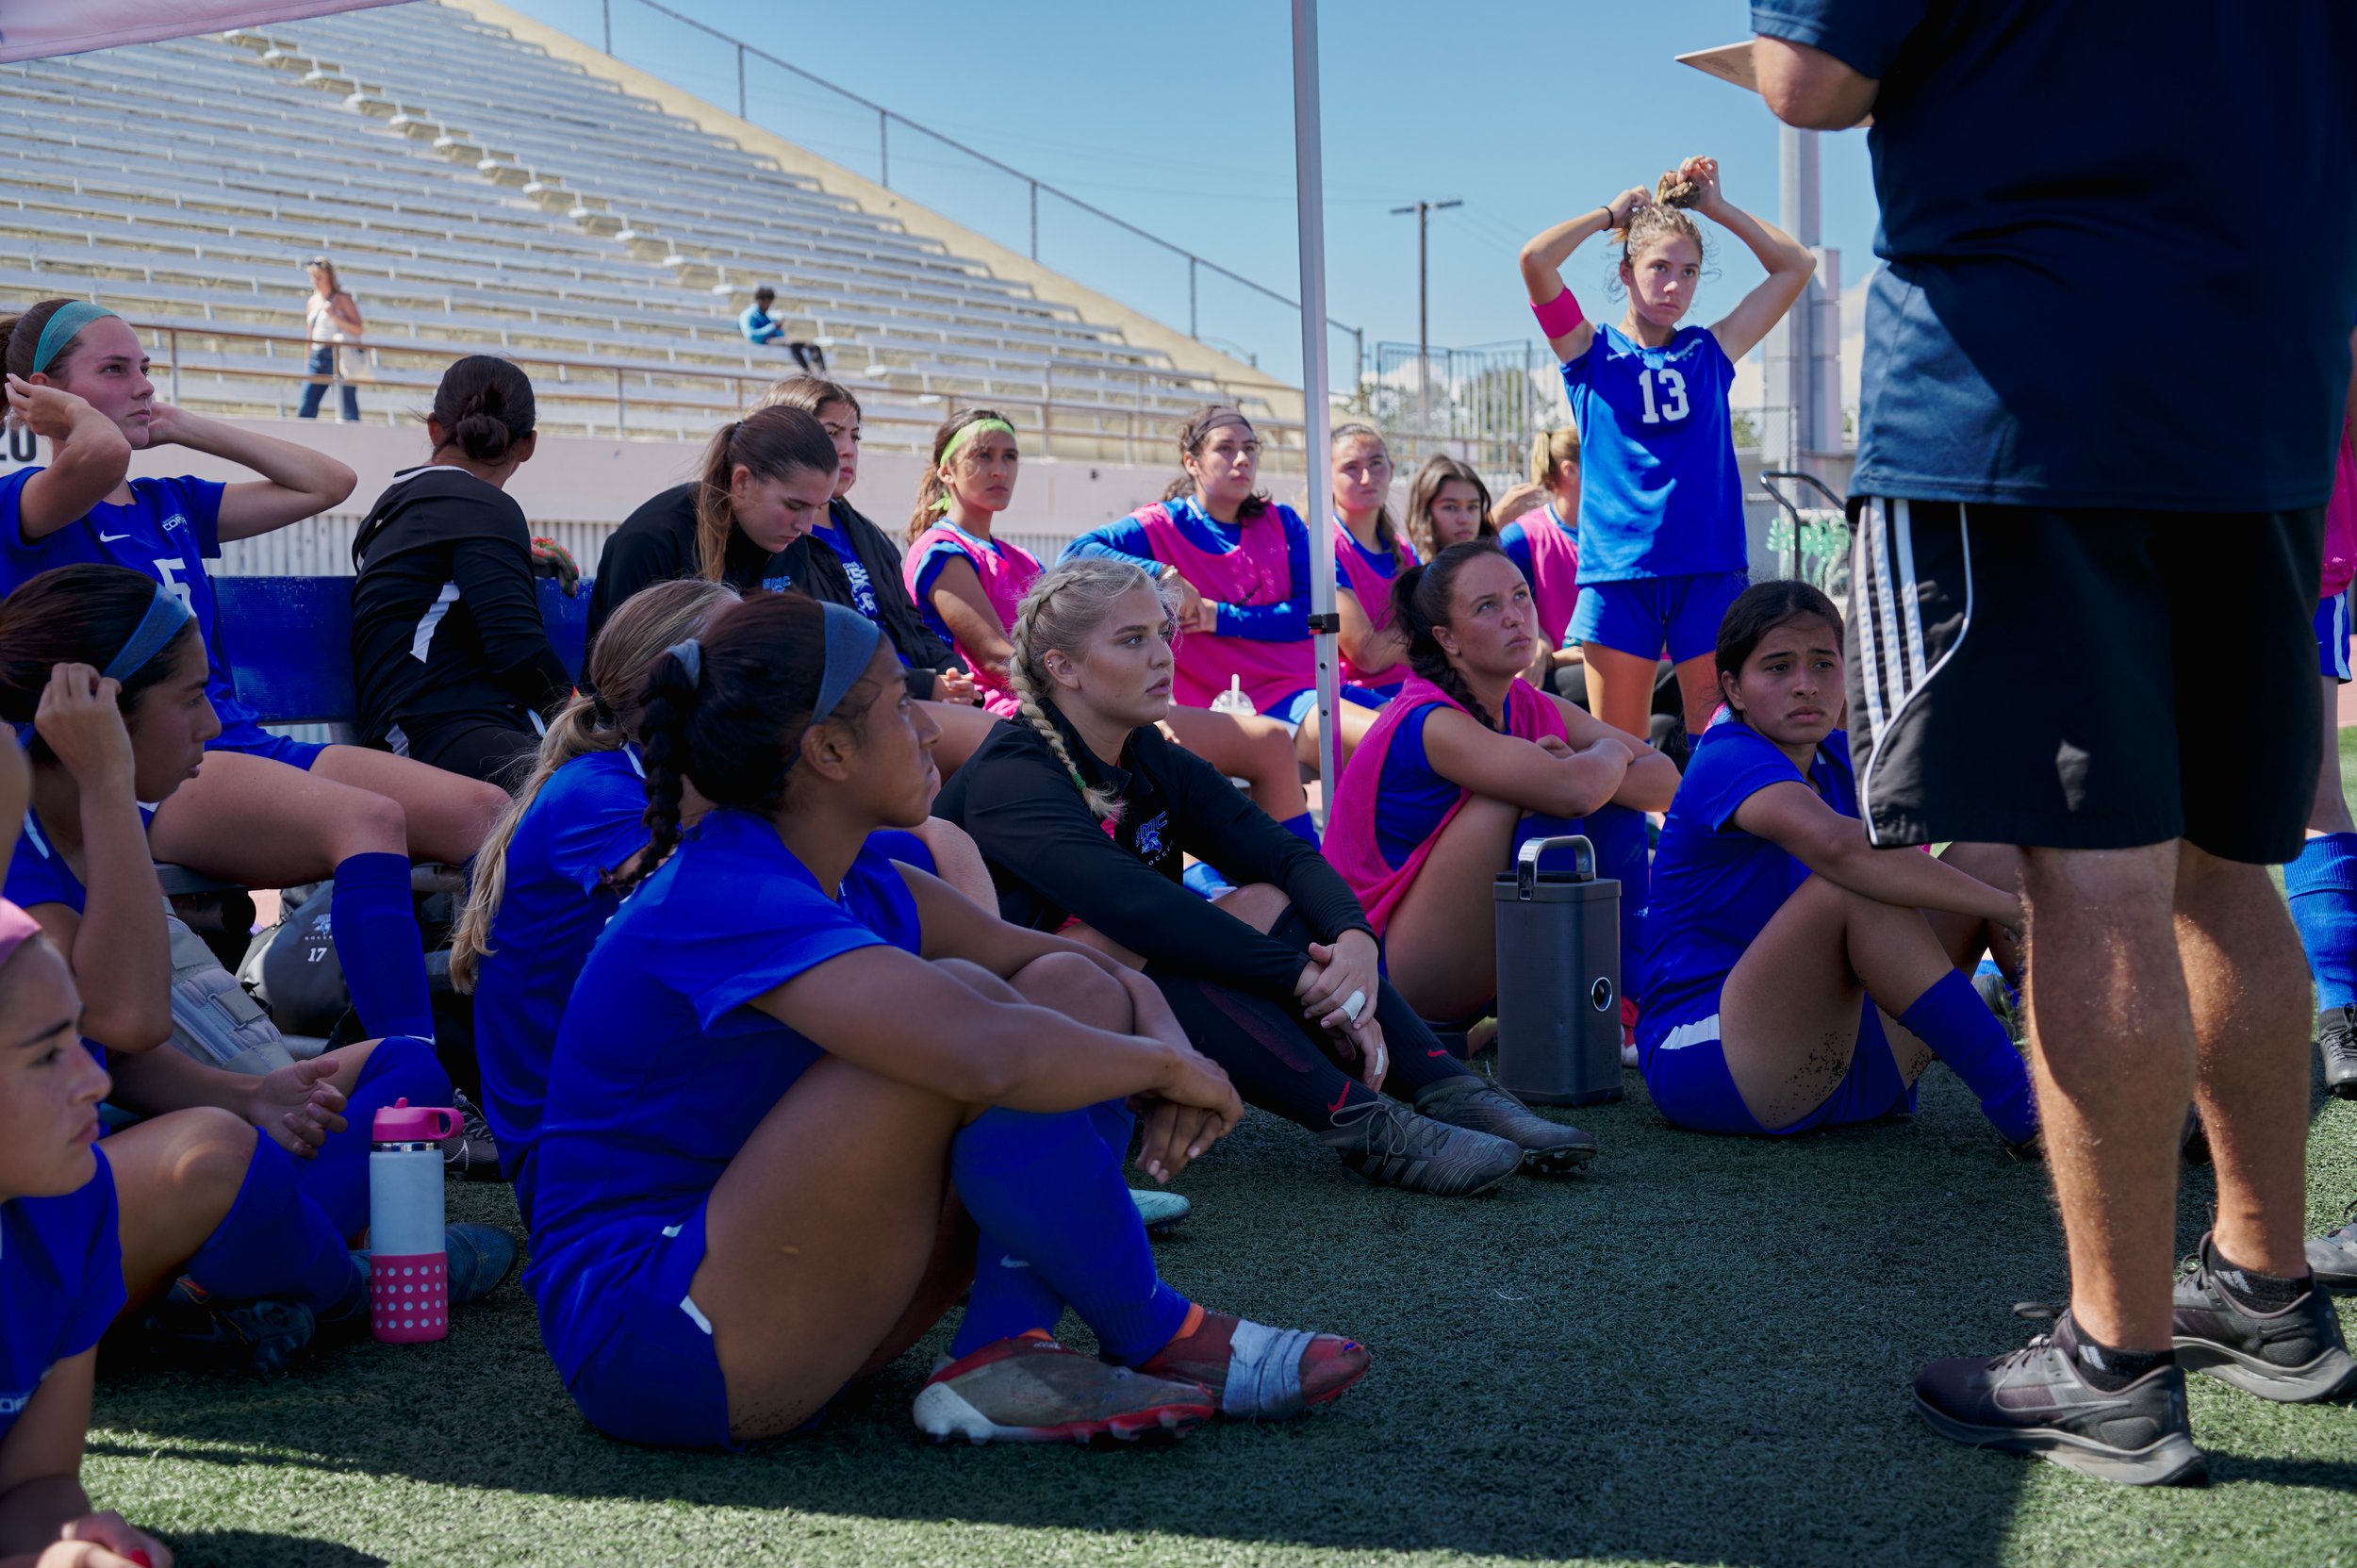  Members of the Santa Monica College Corsairs Women's Soccer team listen to Head Coach Aaron Benditson during intermission at the game against the Santa Barbara City College Vaqueros on Tuesday, Sept. 20, 2022, at Corsair Field. The game ended in a 1